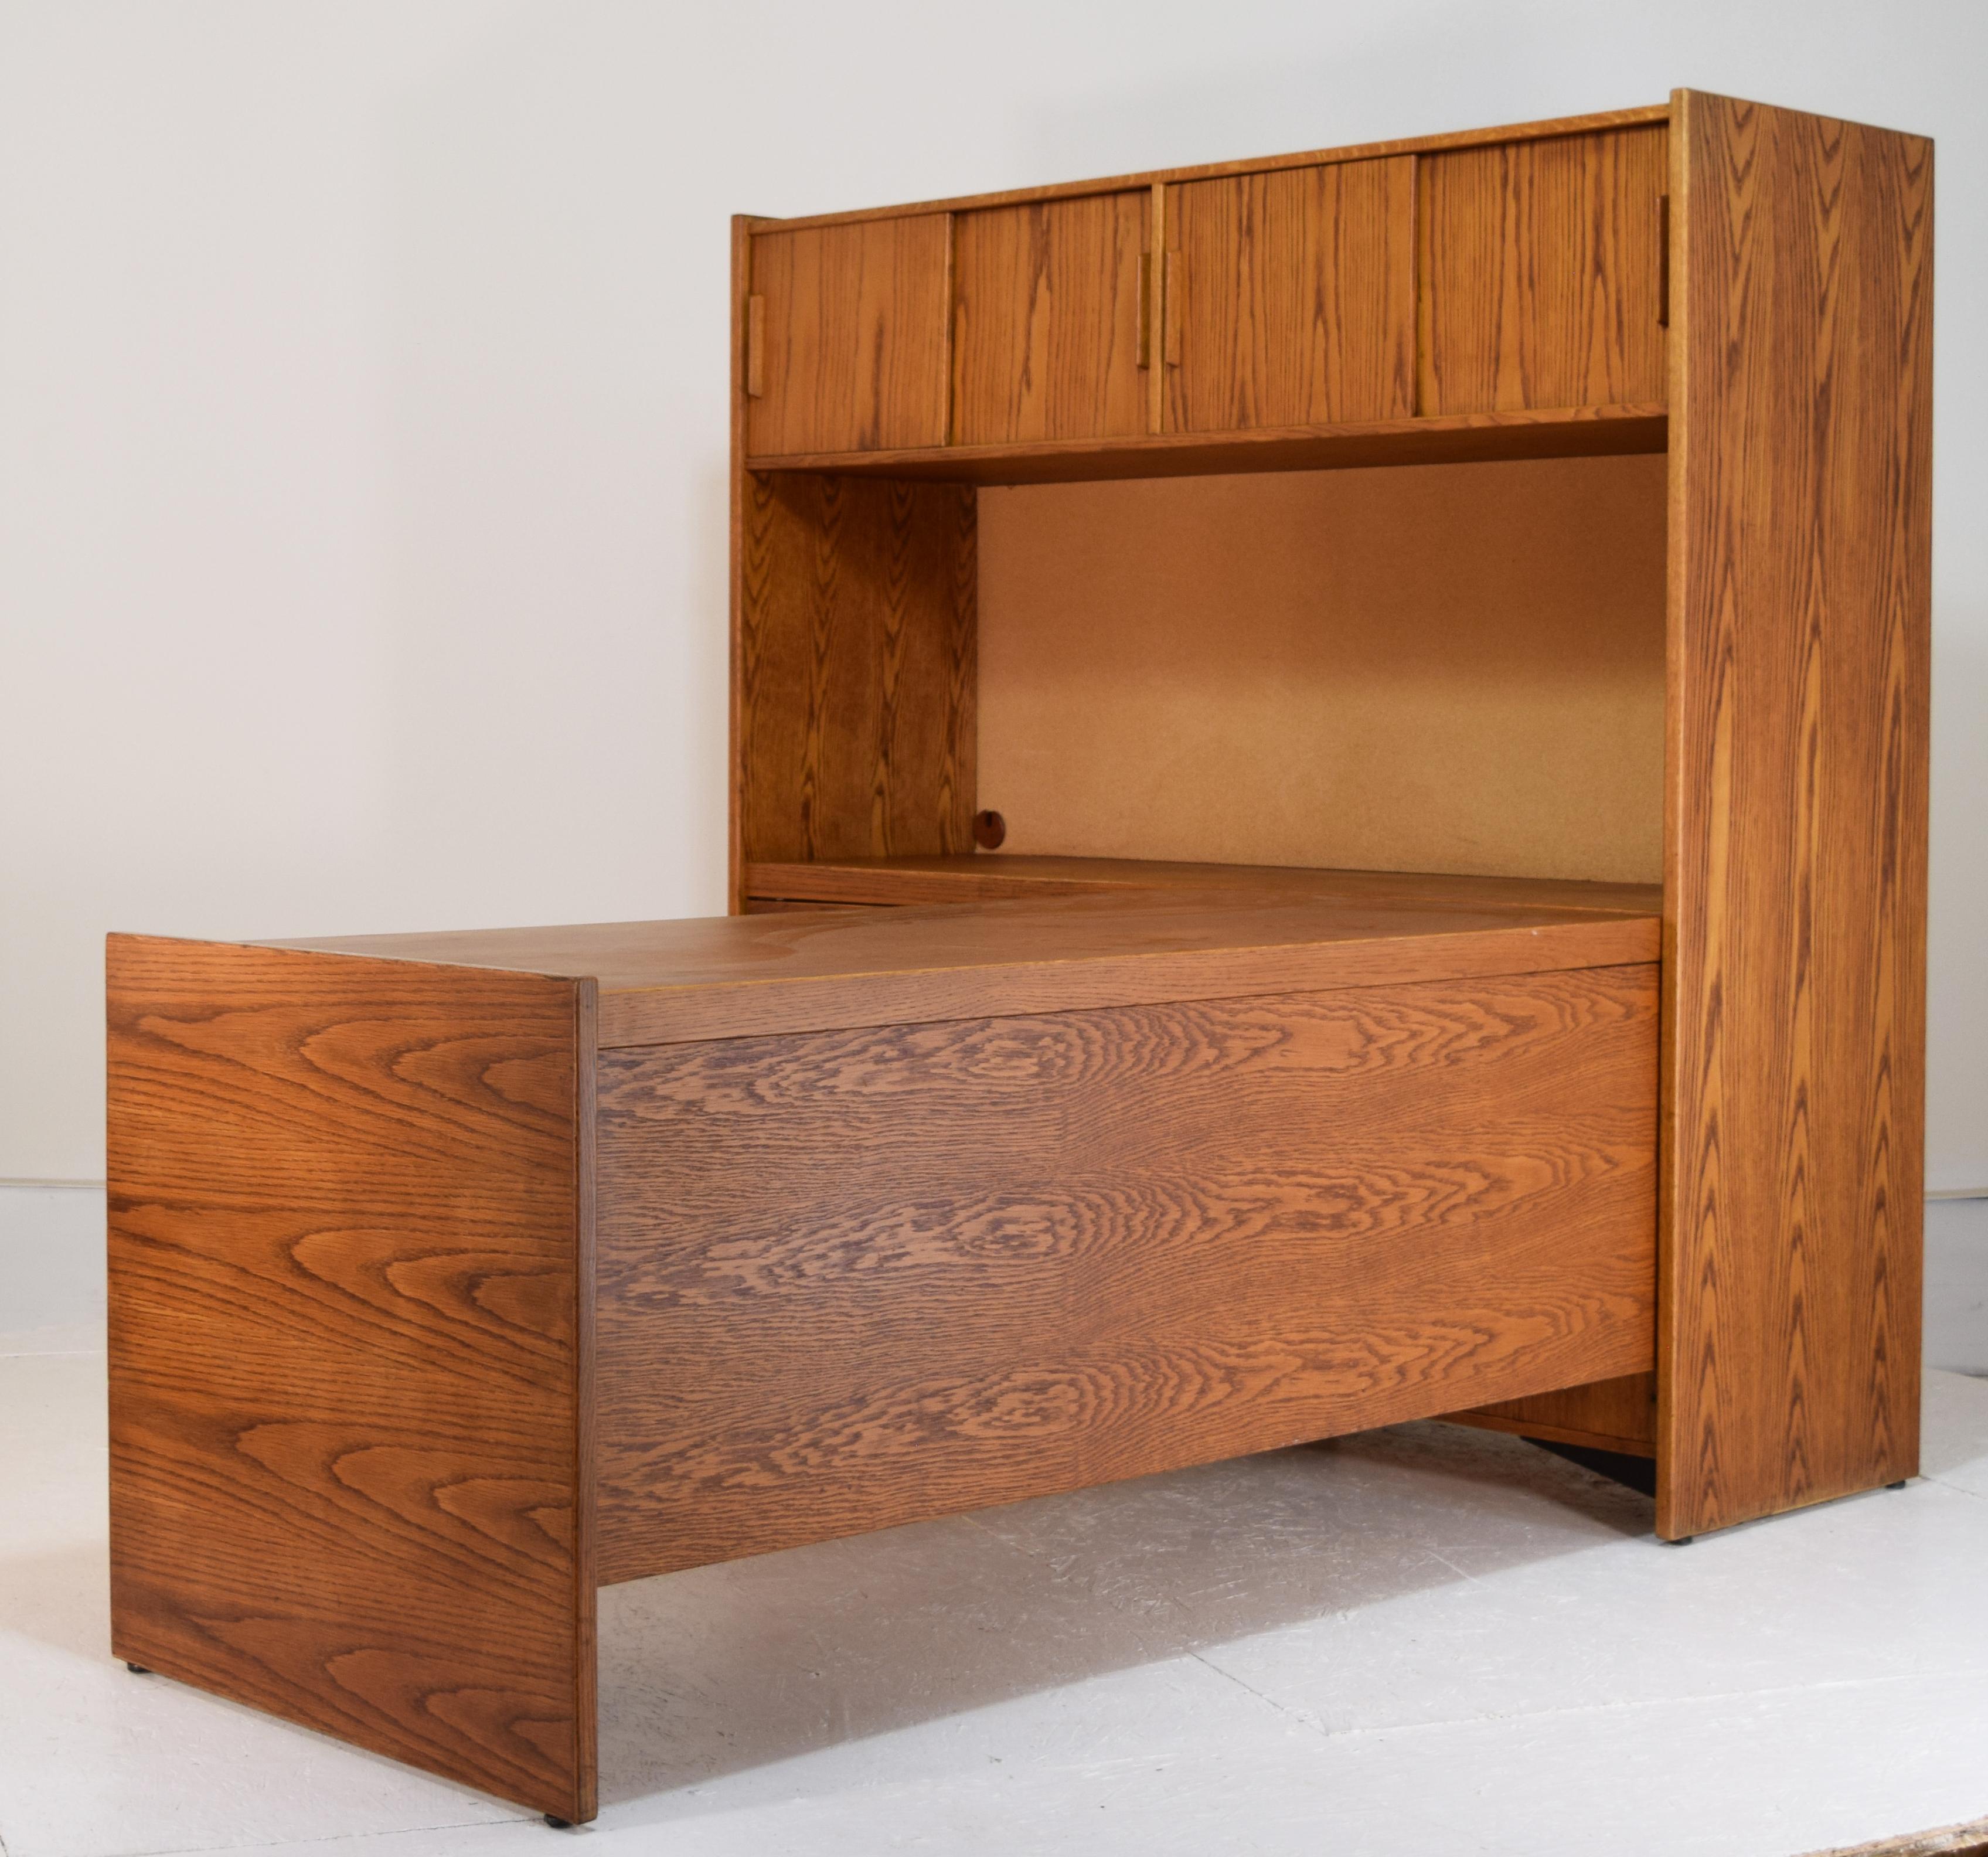 Jens Risom, Circa 1965, part of the Group 5 Series. Oak. L-shaped desk with raised return storage. 20 images provided.
83.5